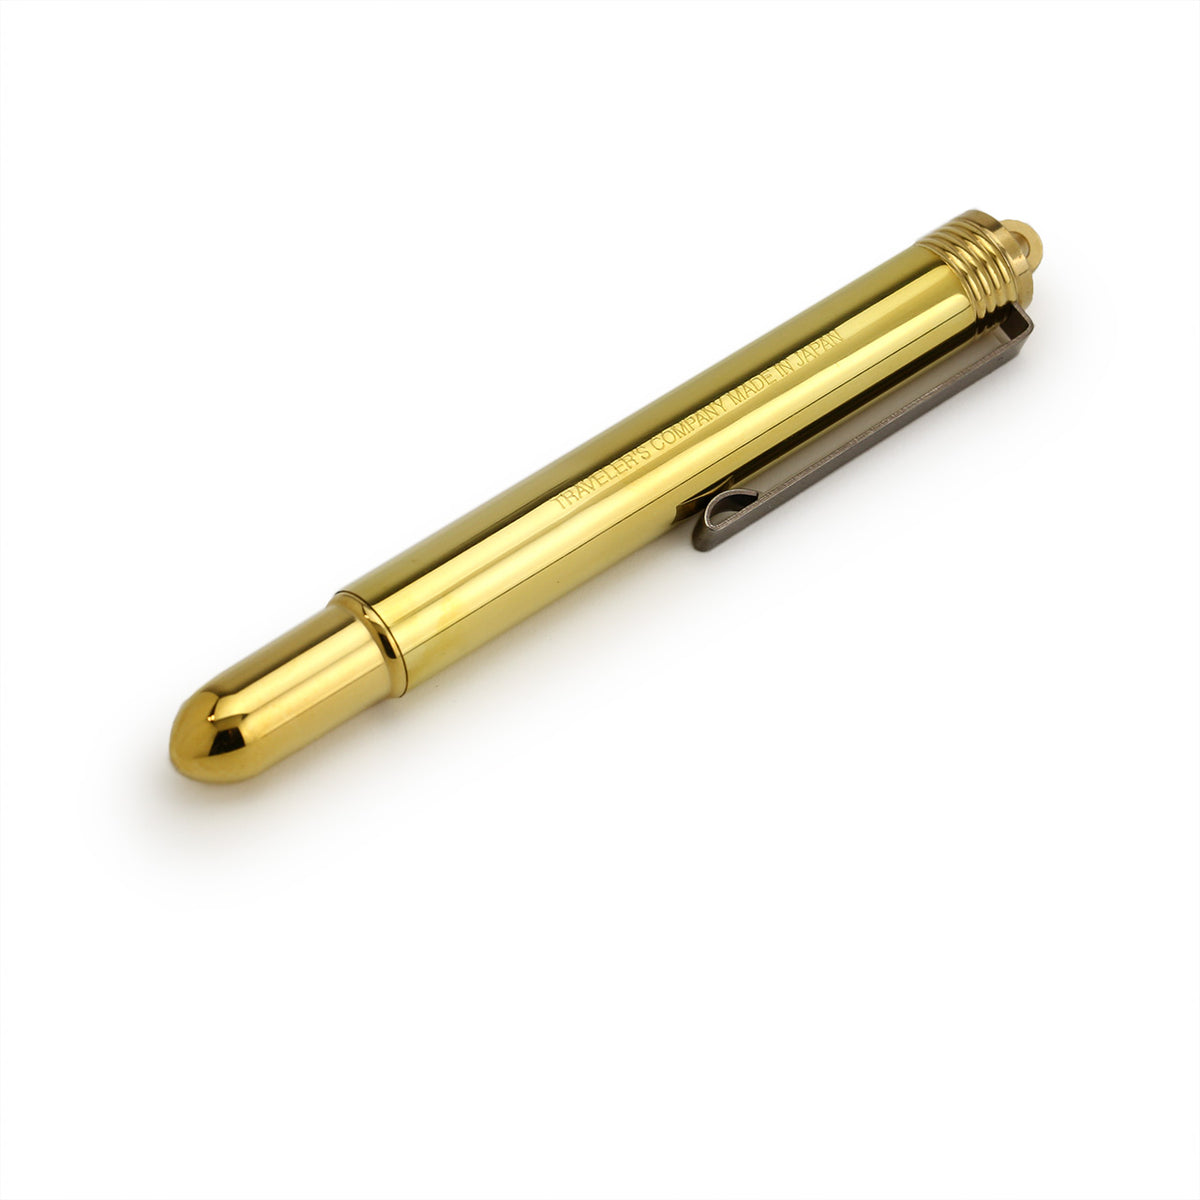 compact brass rollerball pen showing the rustic clip and rounded brass end